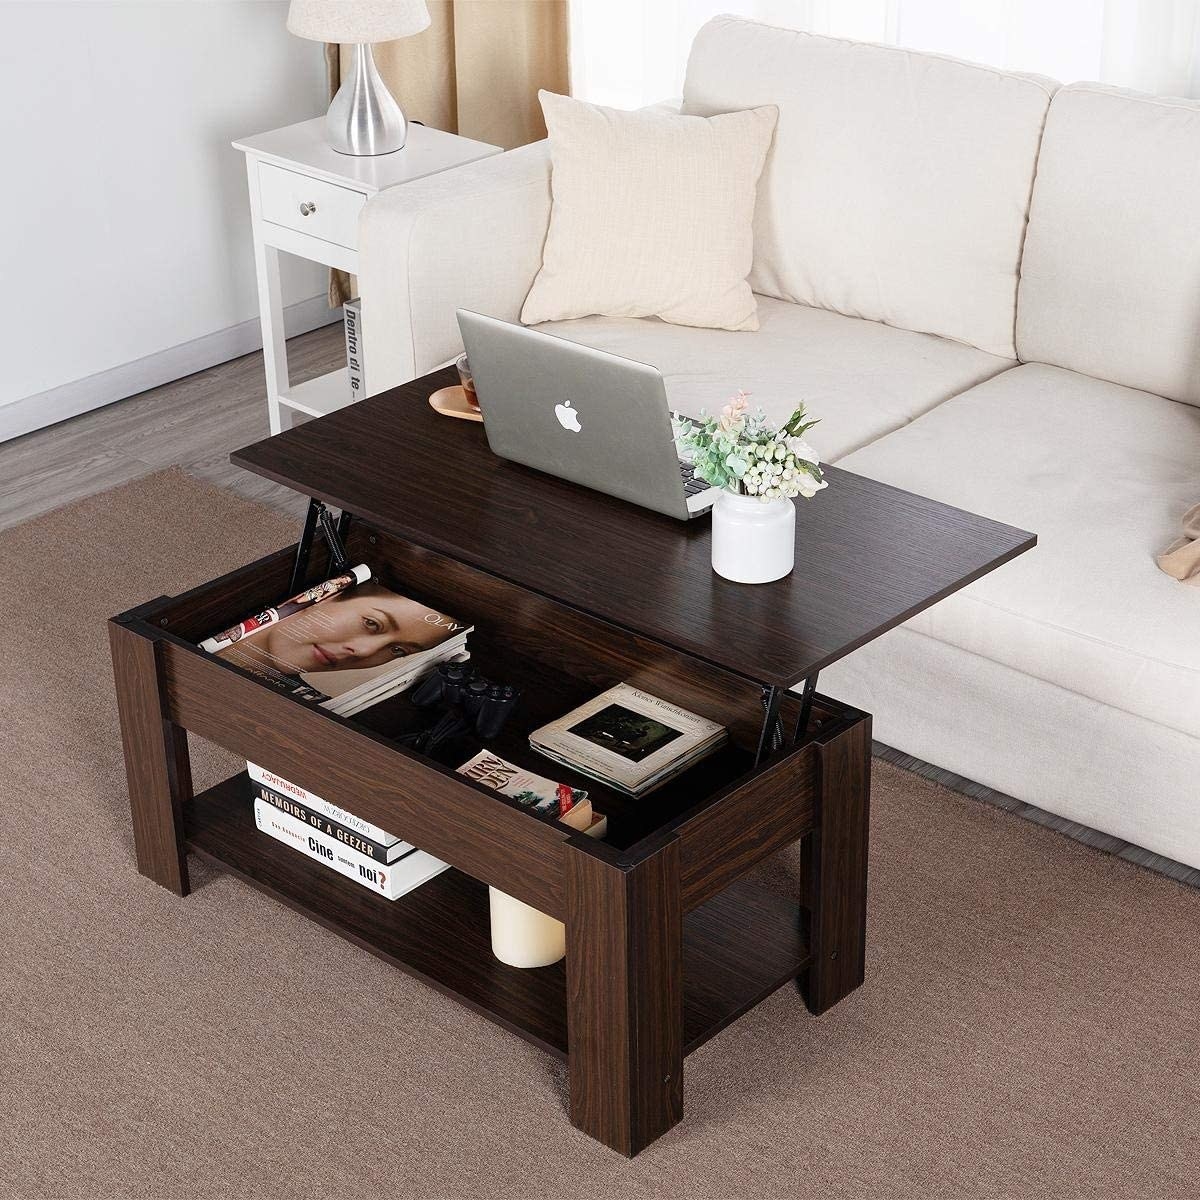 Brown wood coffee table with bottom shelf and a lifting top, revealing an inner area to store more things